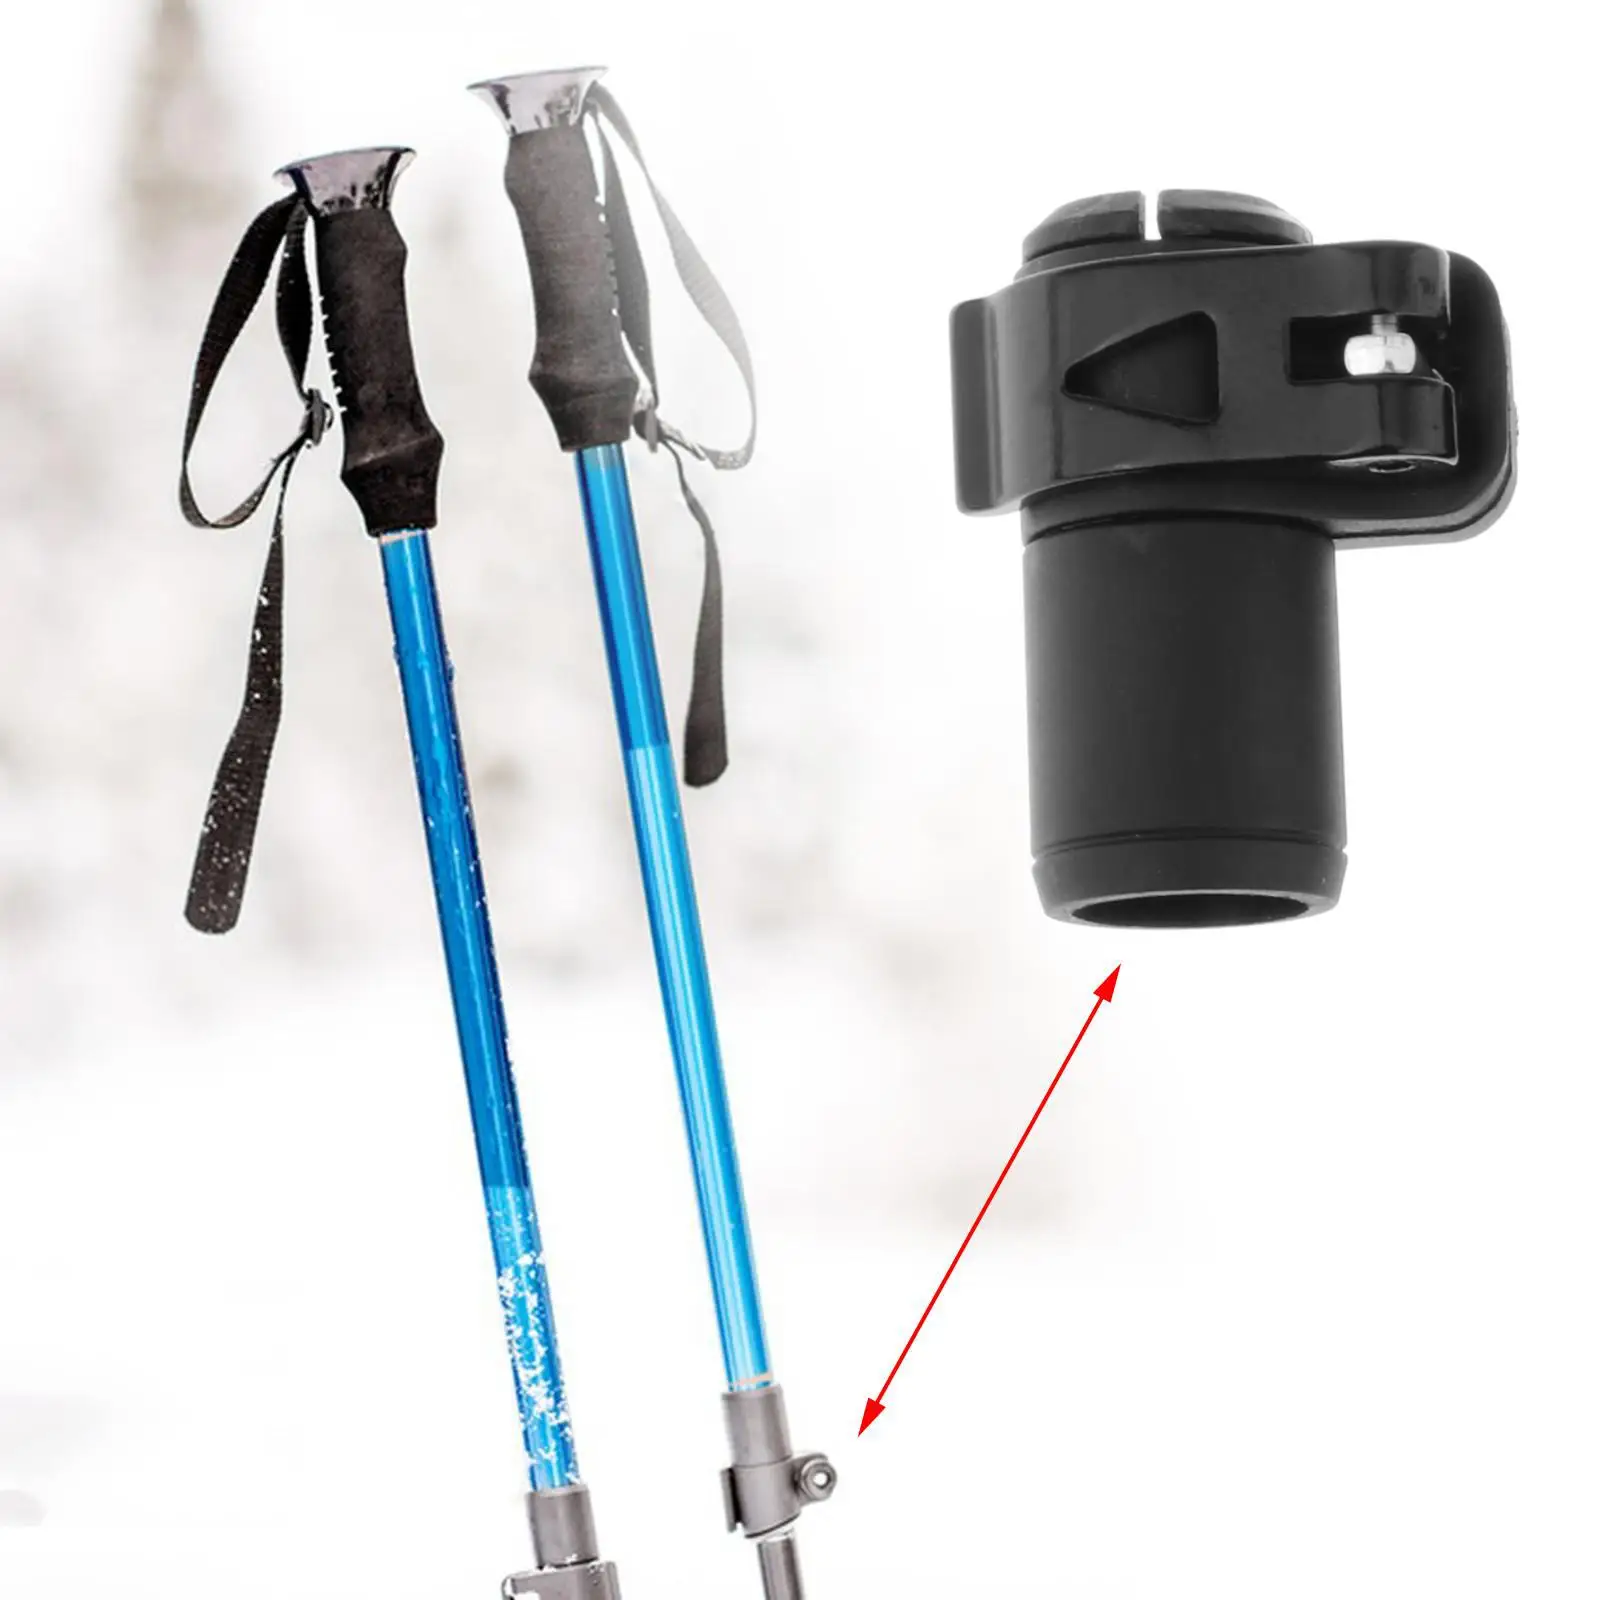 Walking, , Hiking Pole Accessories, Clip, Walking, , Climbing Pole External, Lock for Backpacking